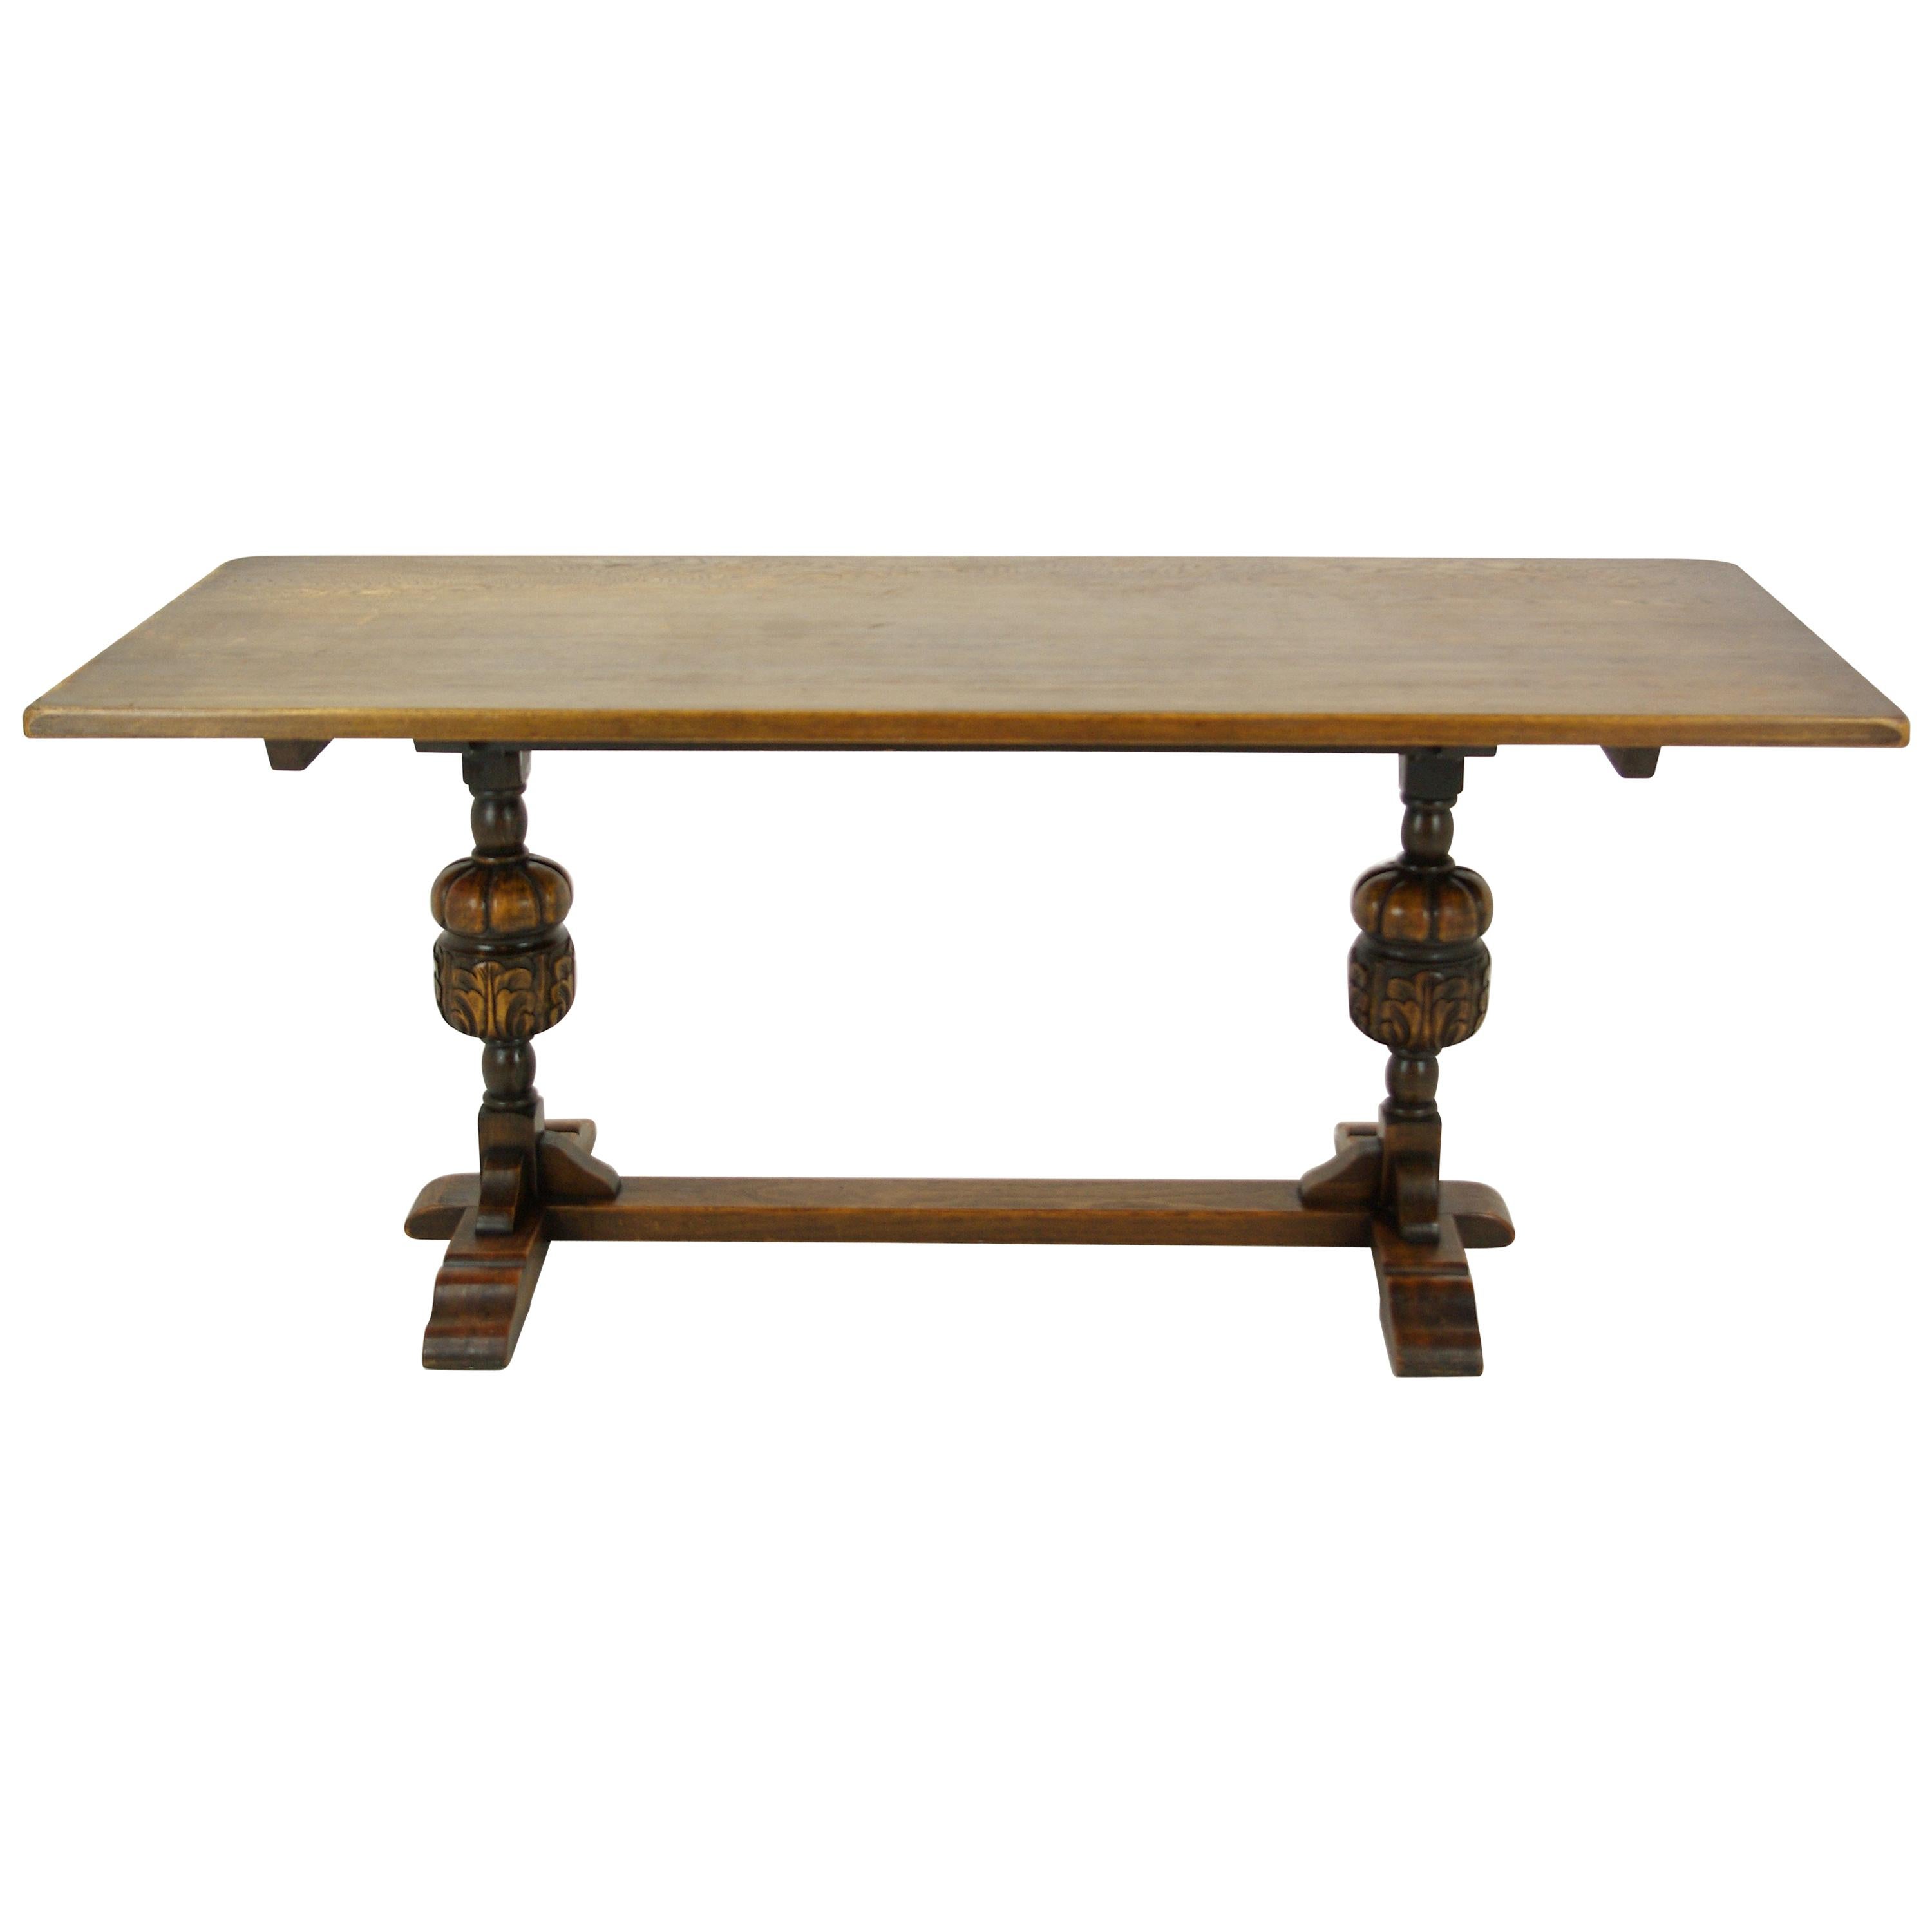 Antique Refectory Table, Dining Table, Writing Table, Hall Table, 1920